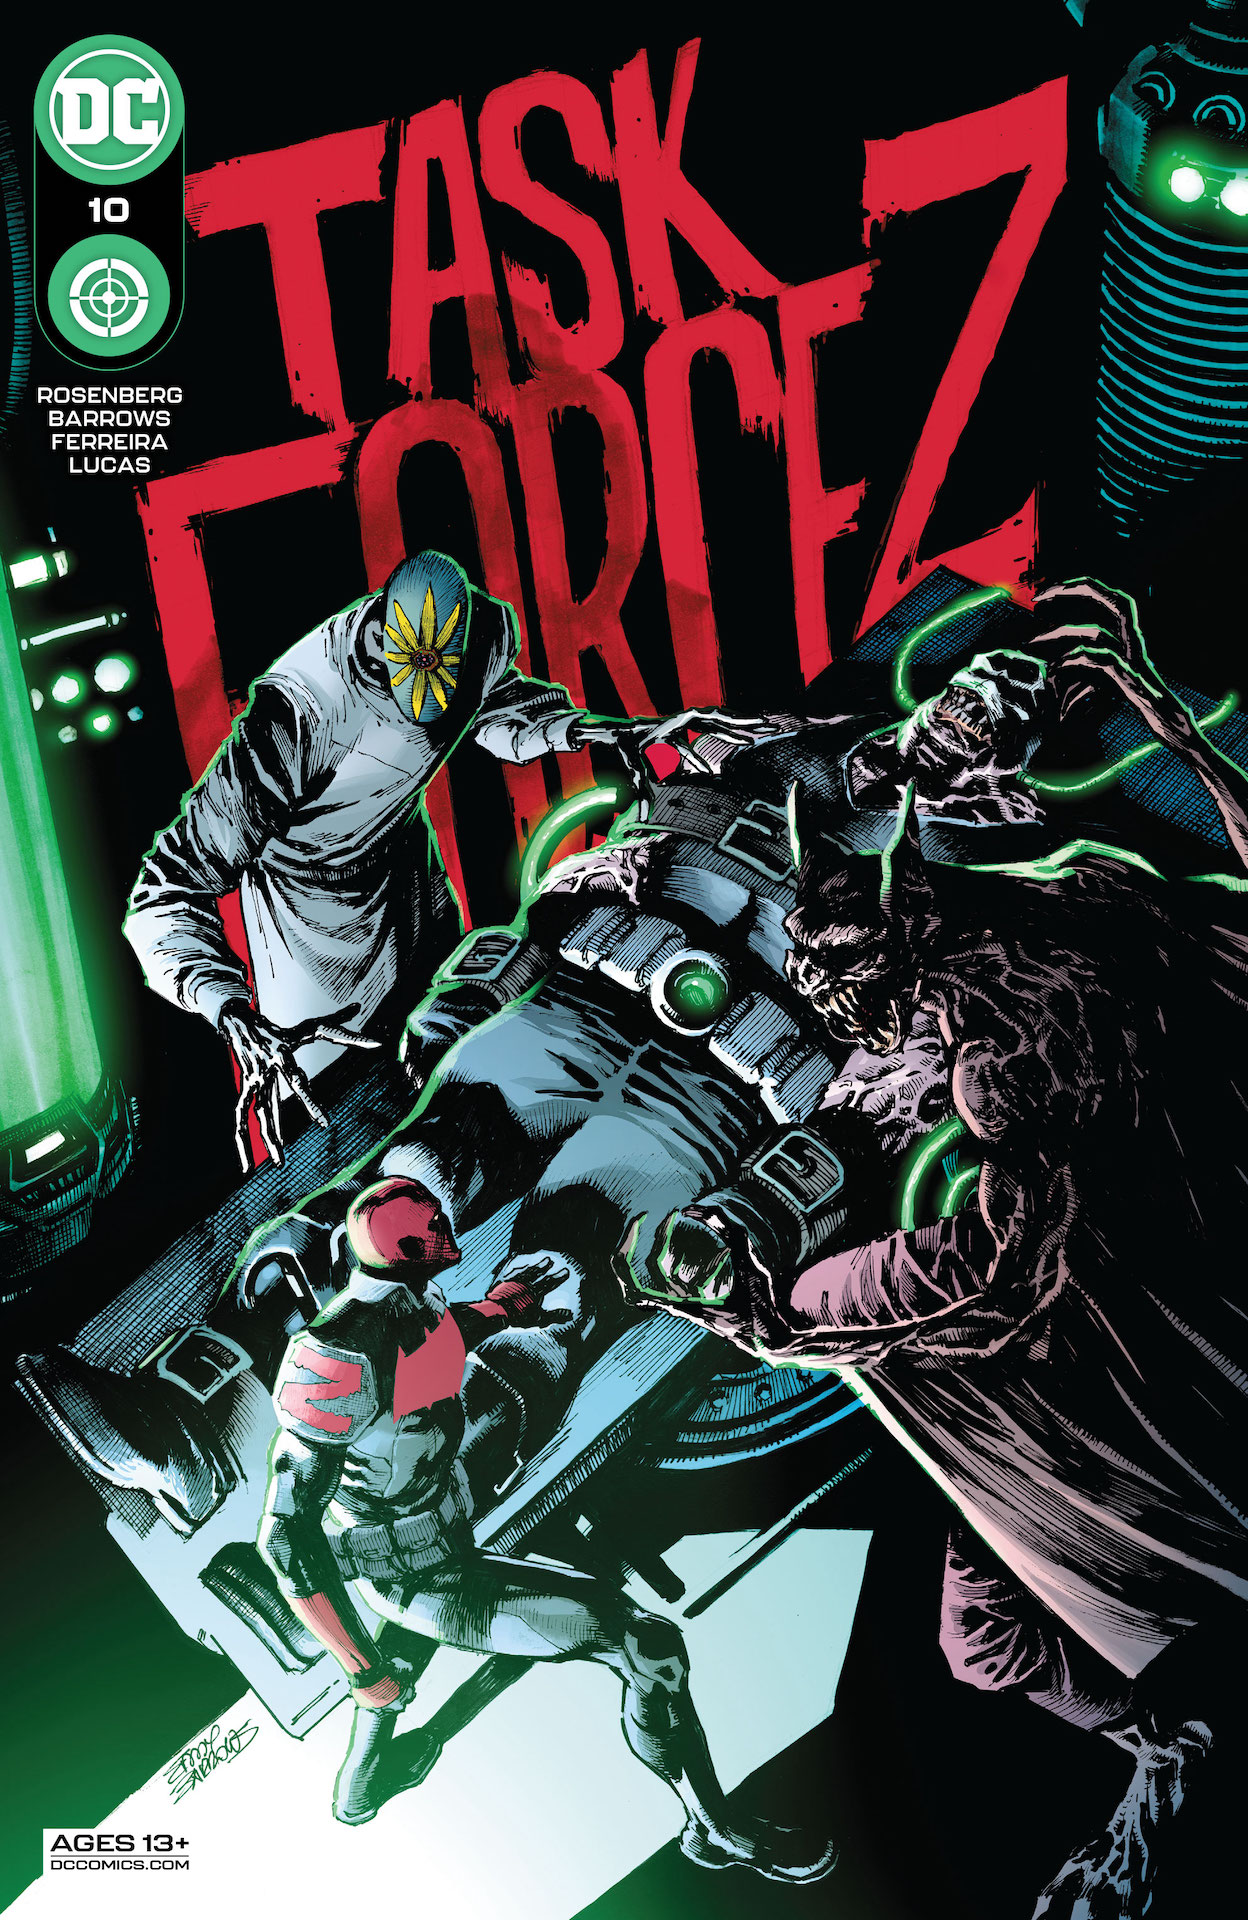 DC Preview: Task Force Z #10